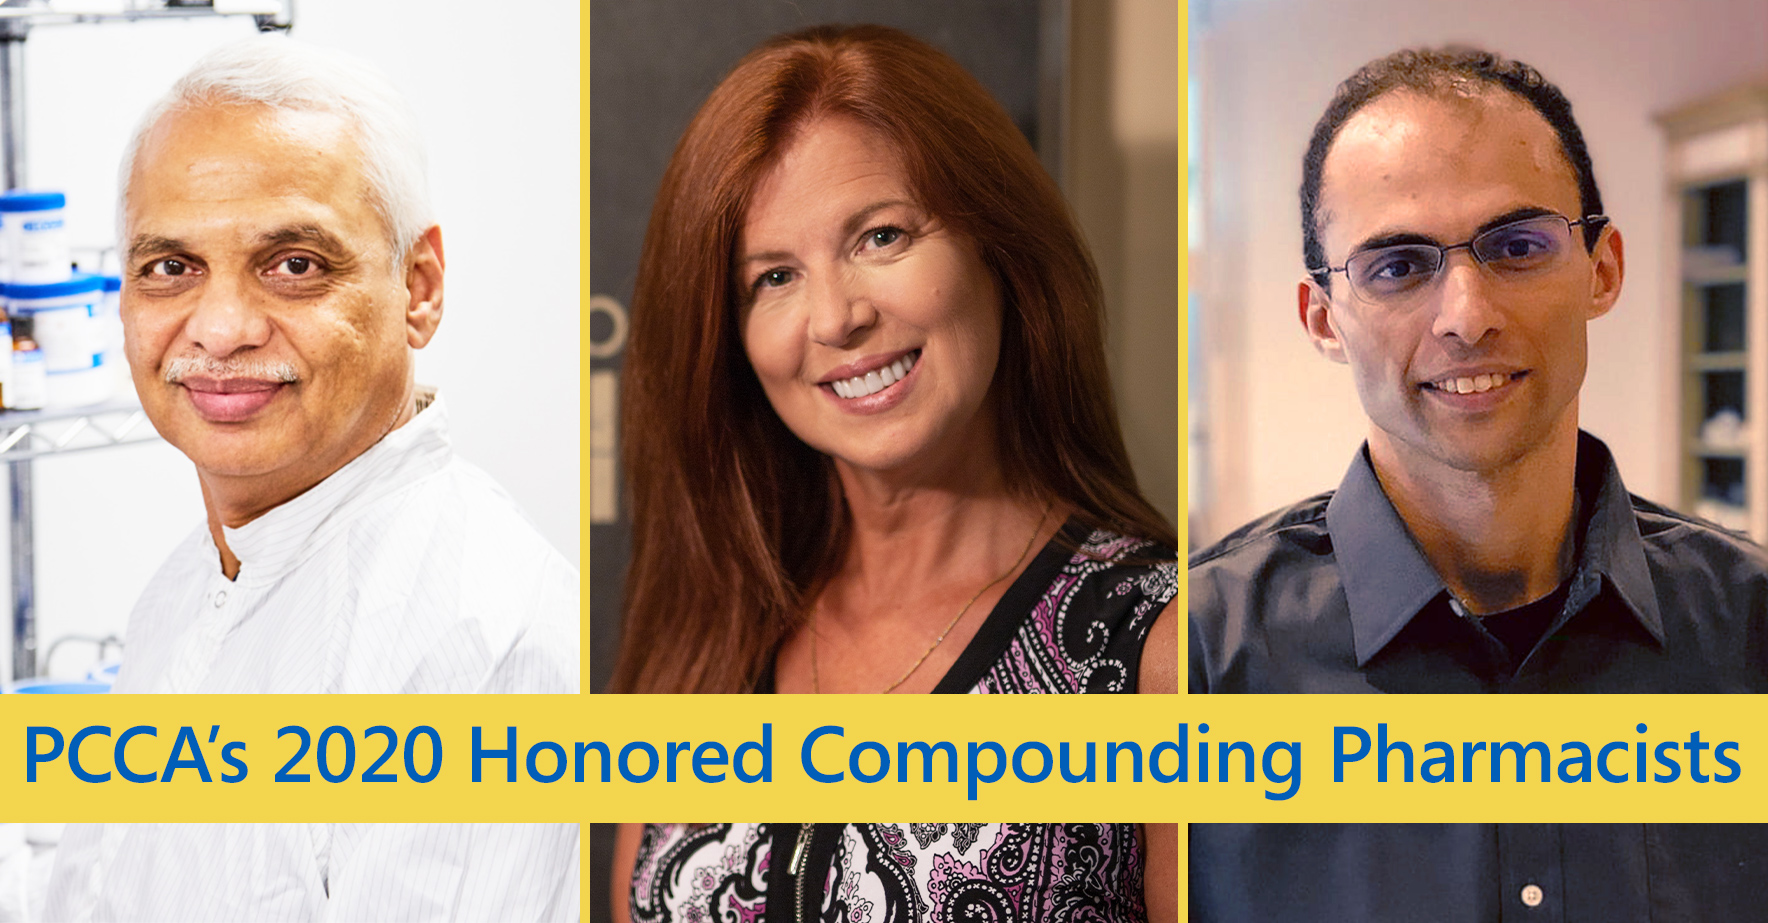 PCCA_2020_Honored_Compounding_Pharmacists.jpg